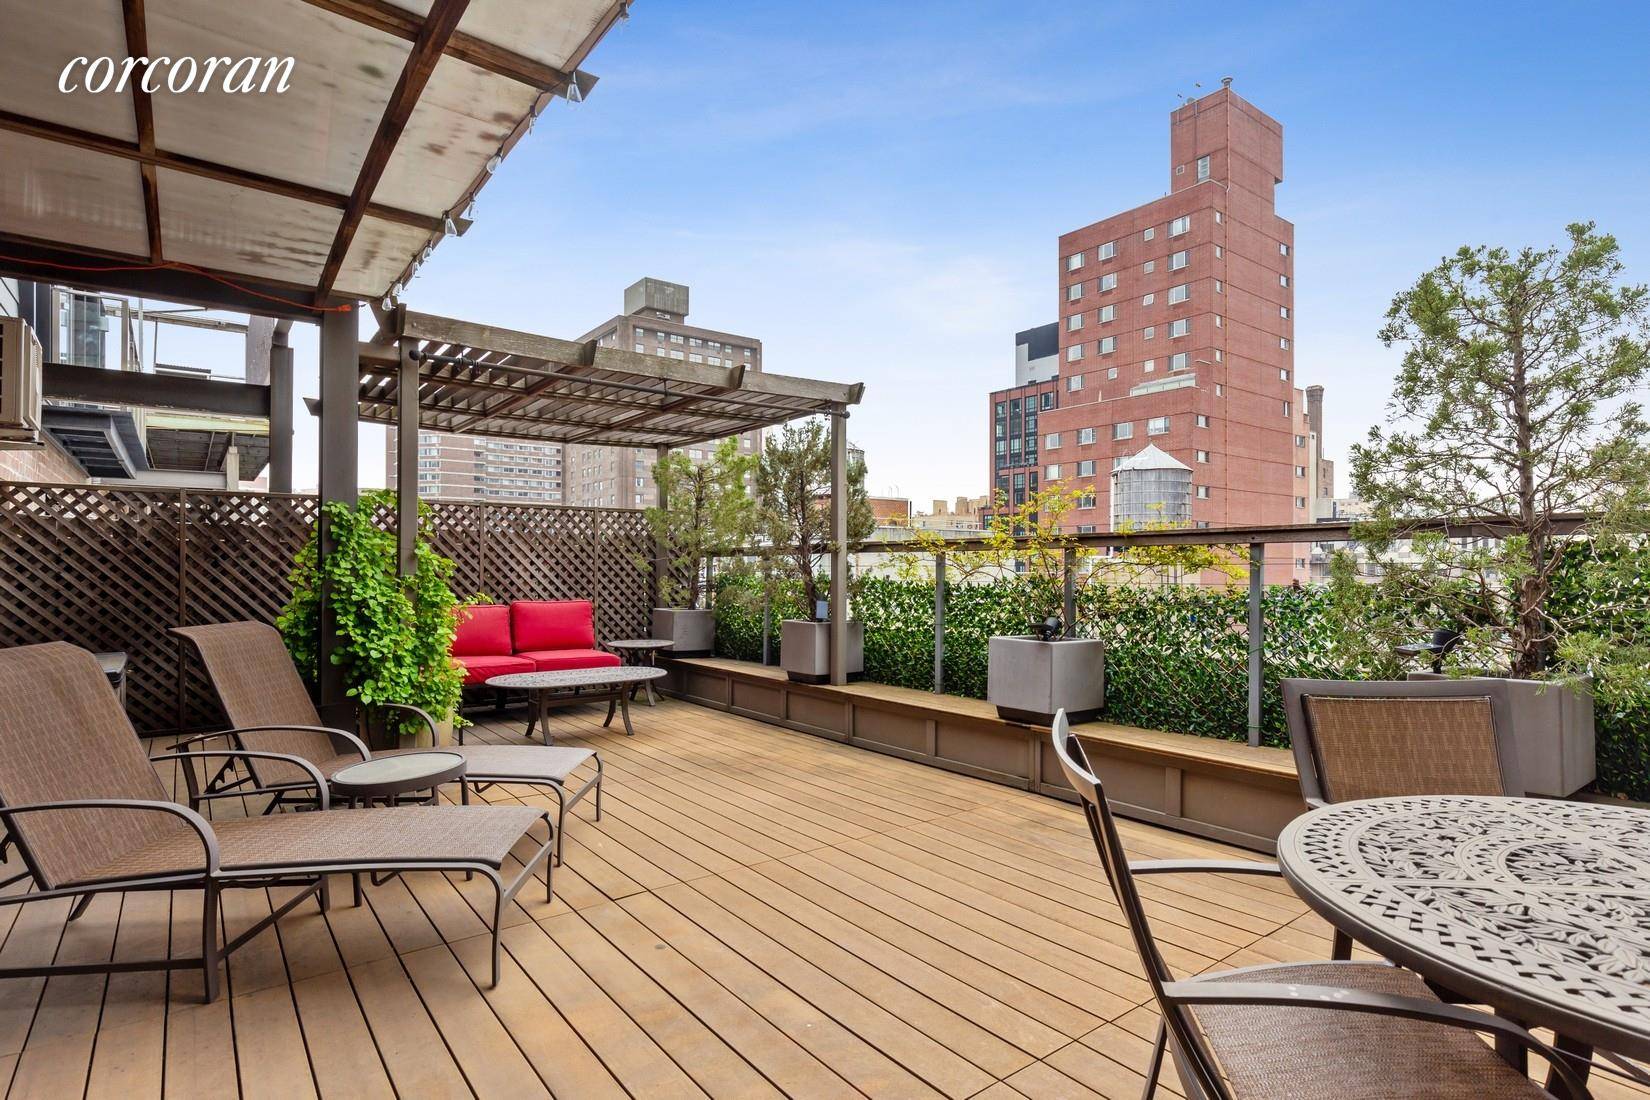 If you are looking for a lease start date of July 1st, 2022, AND a spectacular private outdoor space to luxuriate on all year long, look no further.